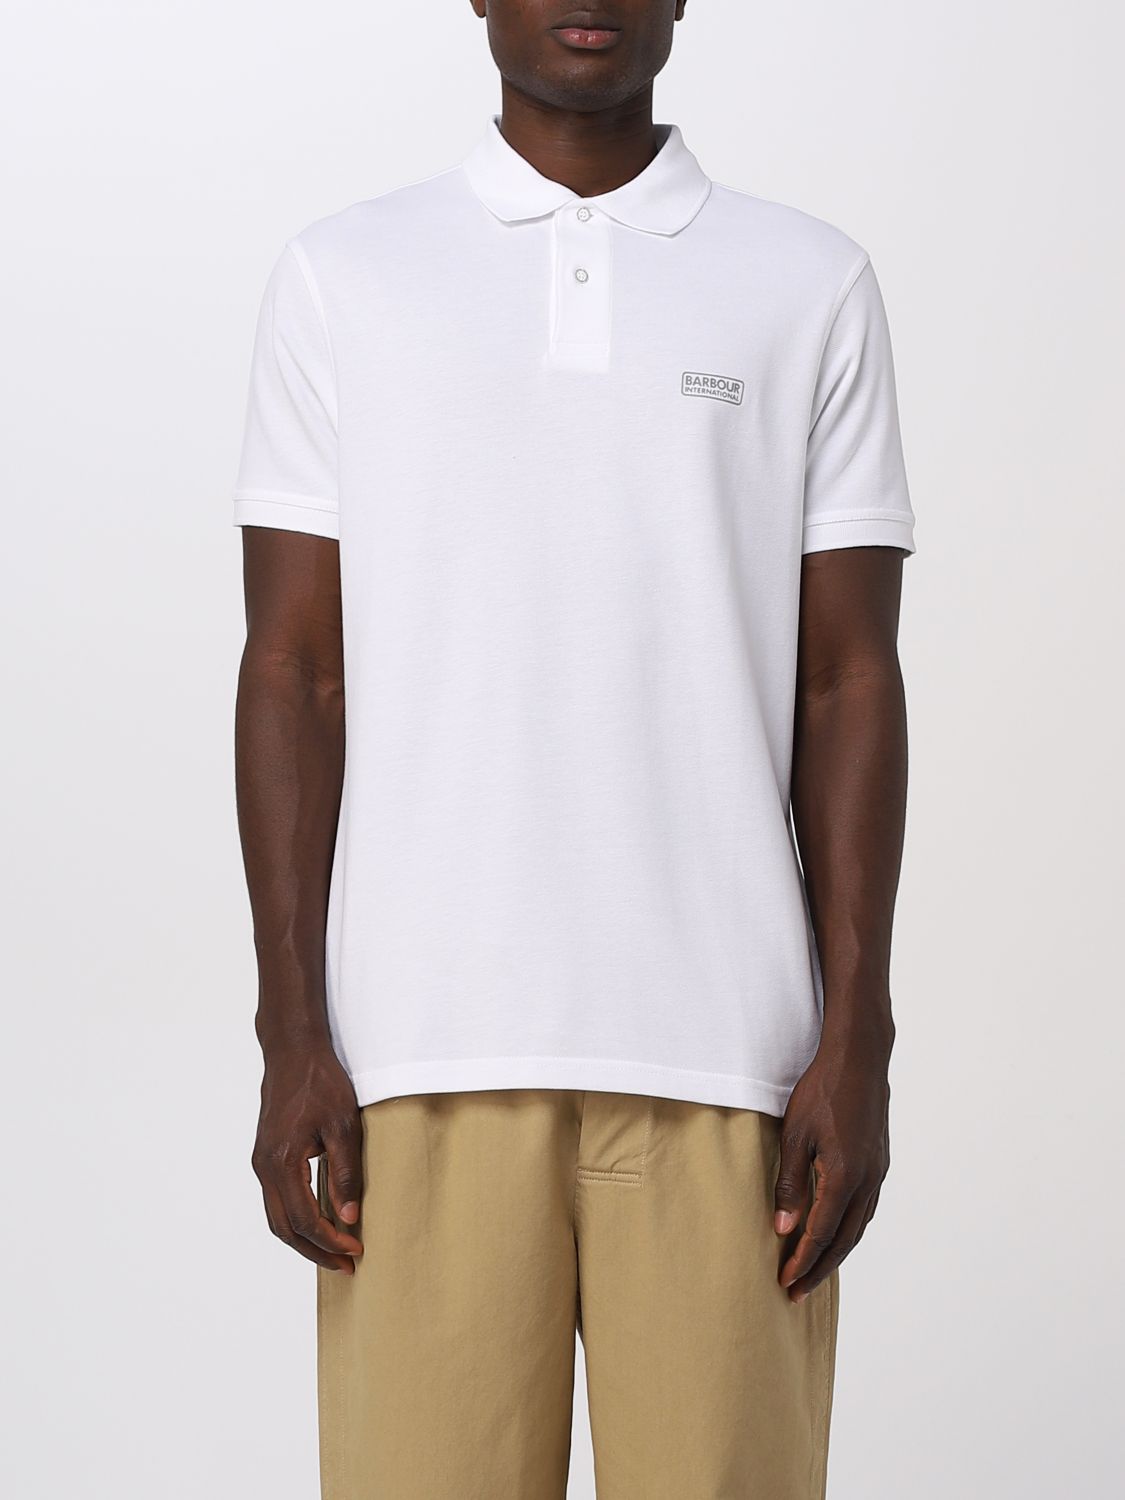 BARBOUR: polo shirt for man - White | Barbour polo shirt MML0914 online ...